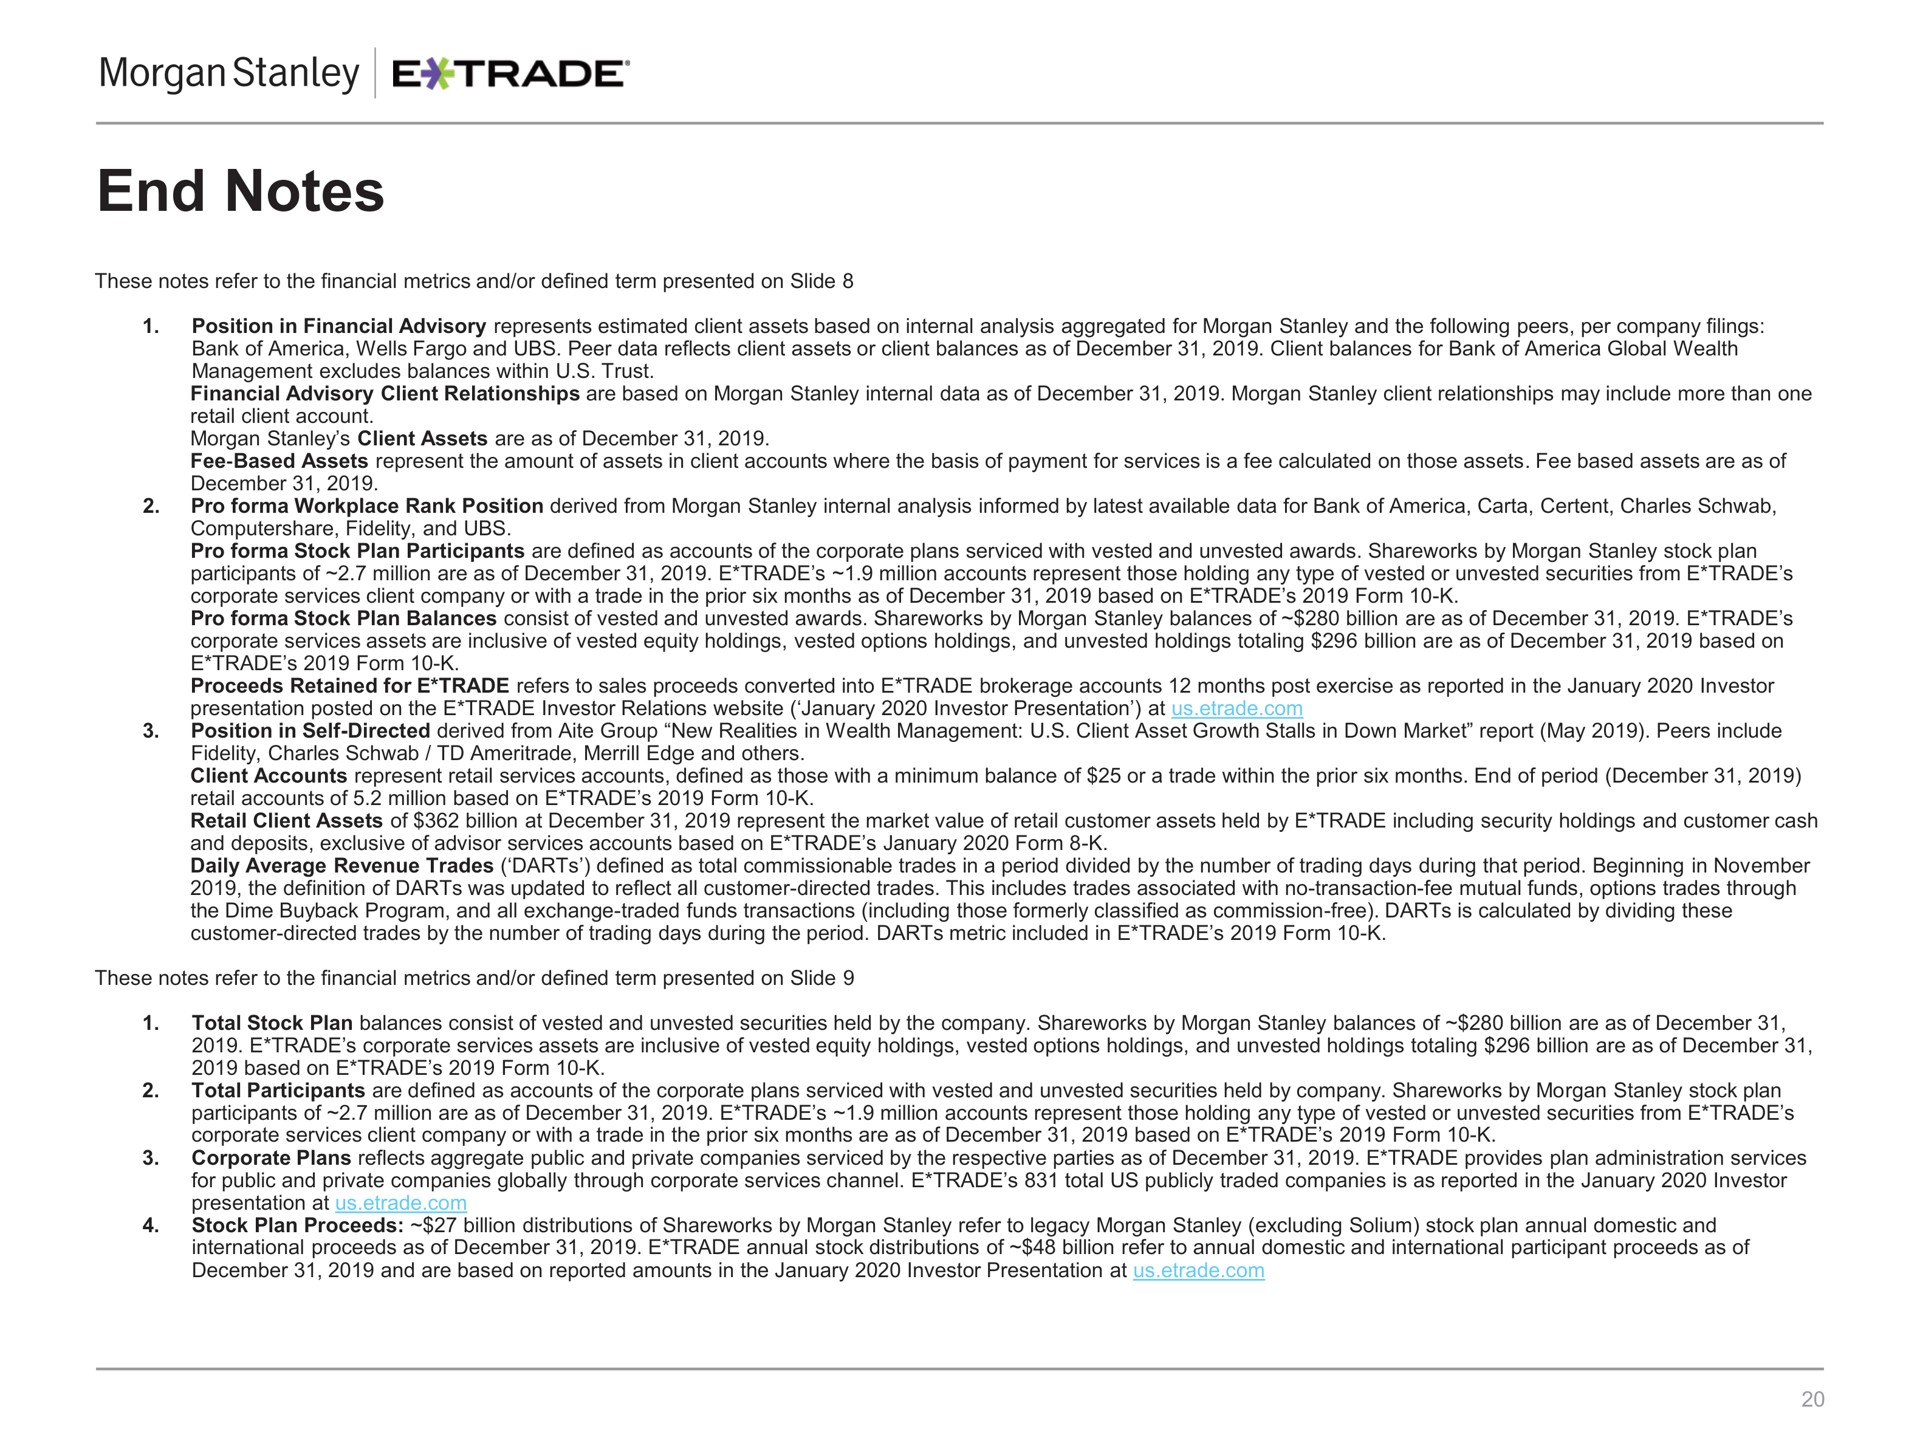 no content left of this line no content right of this line end notes place content below this line place content below this line source and footnotes guideline no content left of this line no content right of this line | Morgan Stanley